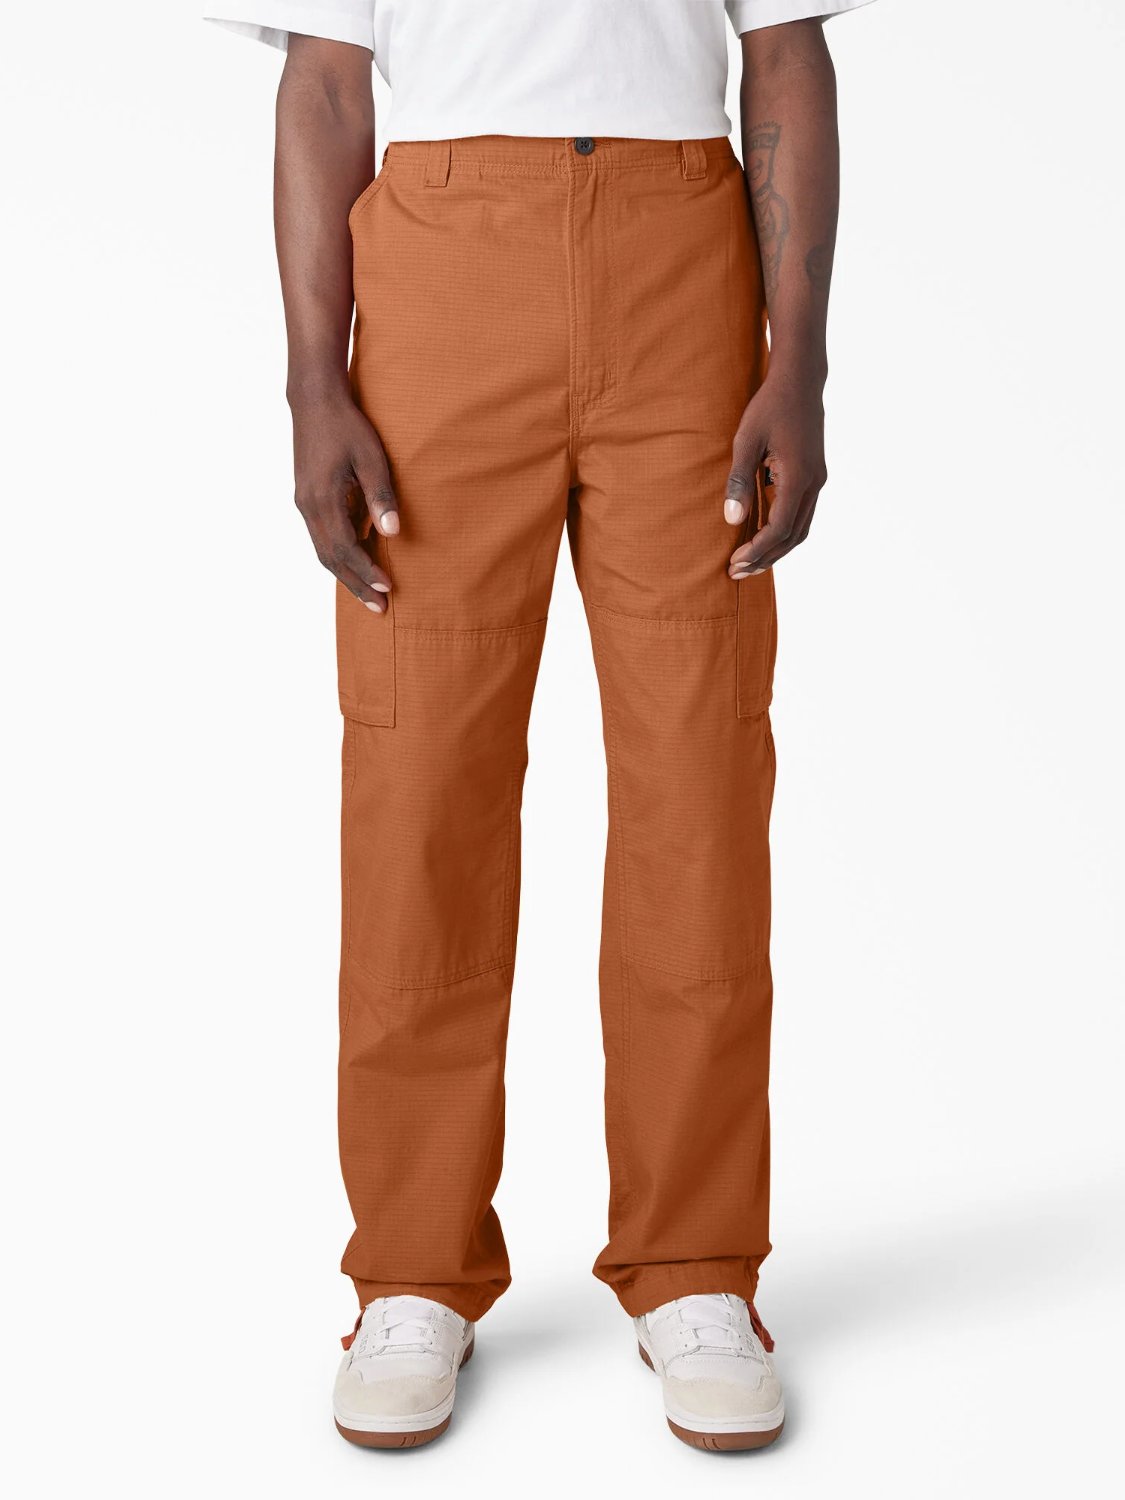 EAGLE BEND RELAXED FIT DOUBLE KNEE CARGO PANT – ZEBRACLUB